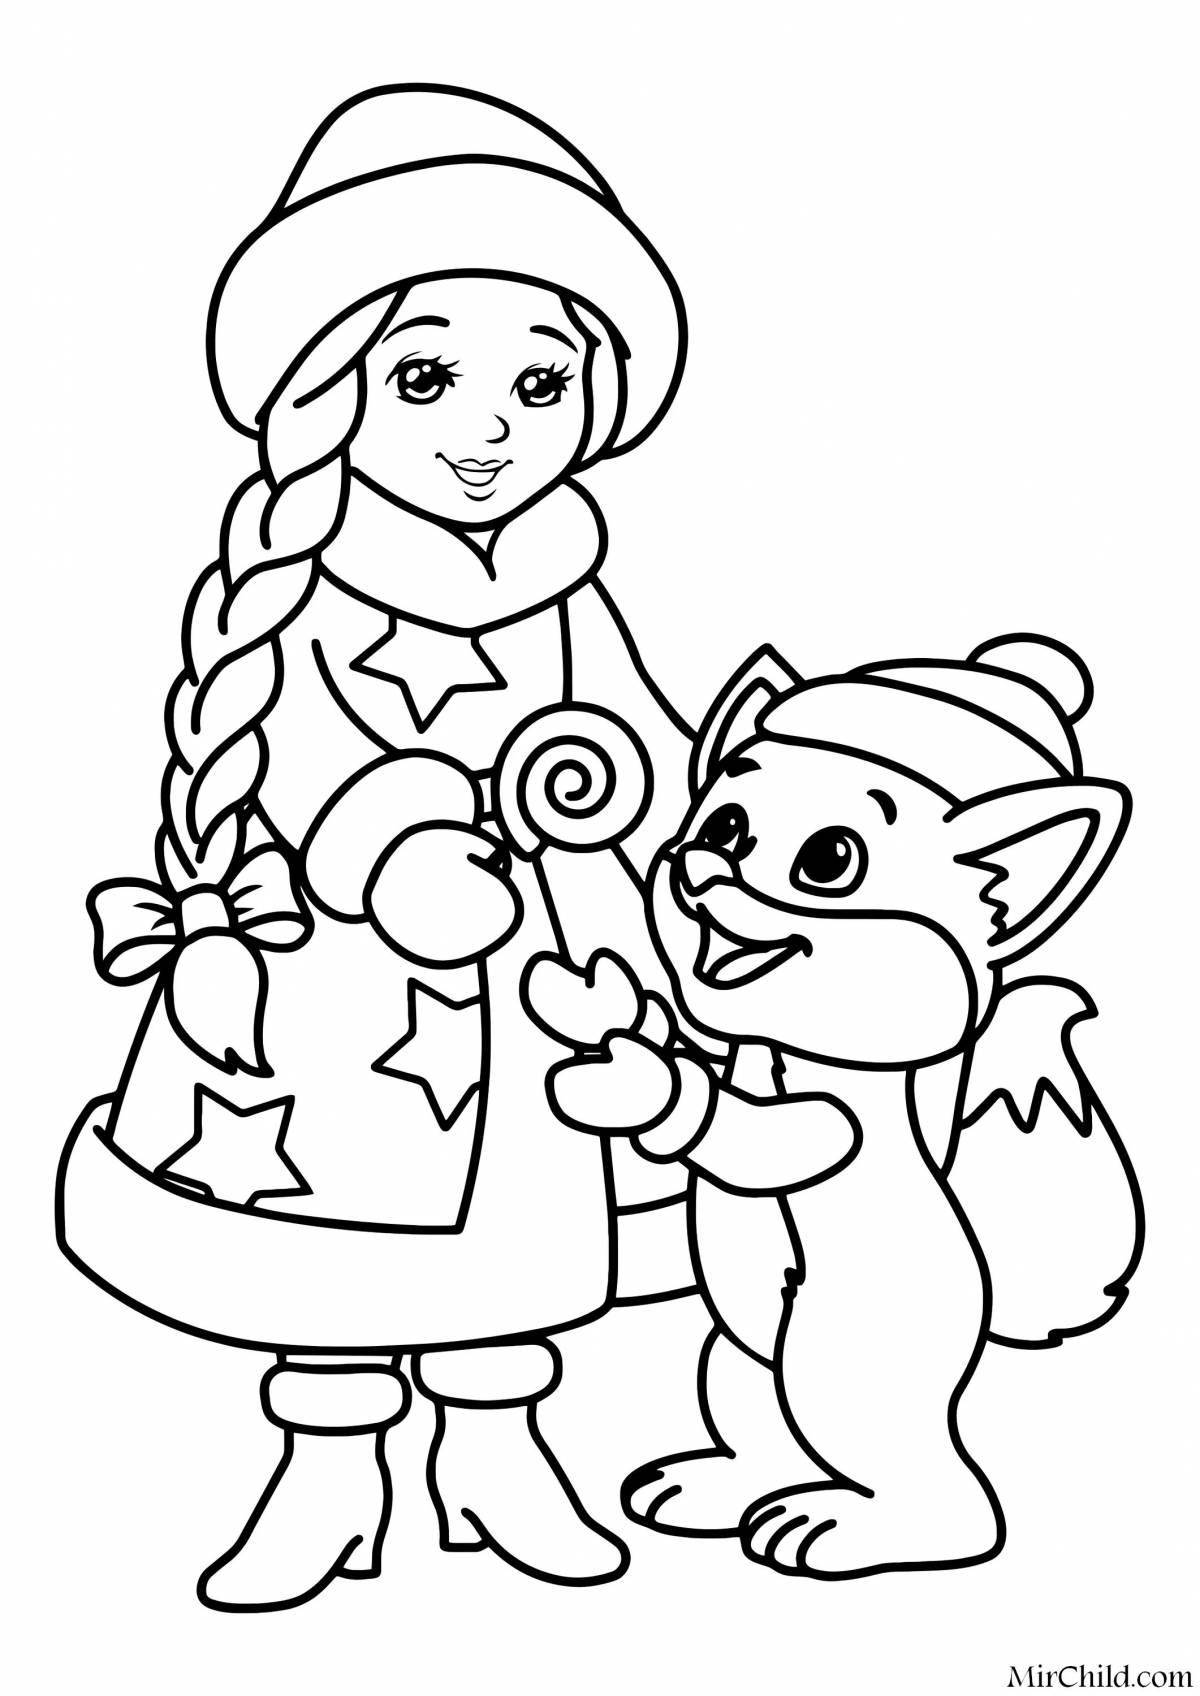 Exquisite snow maiden Christmas coloring book